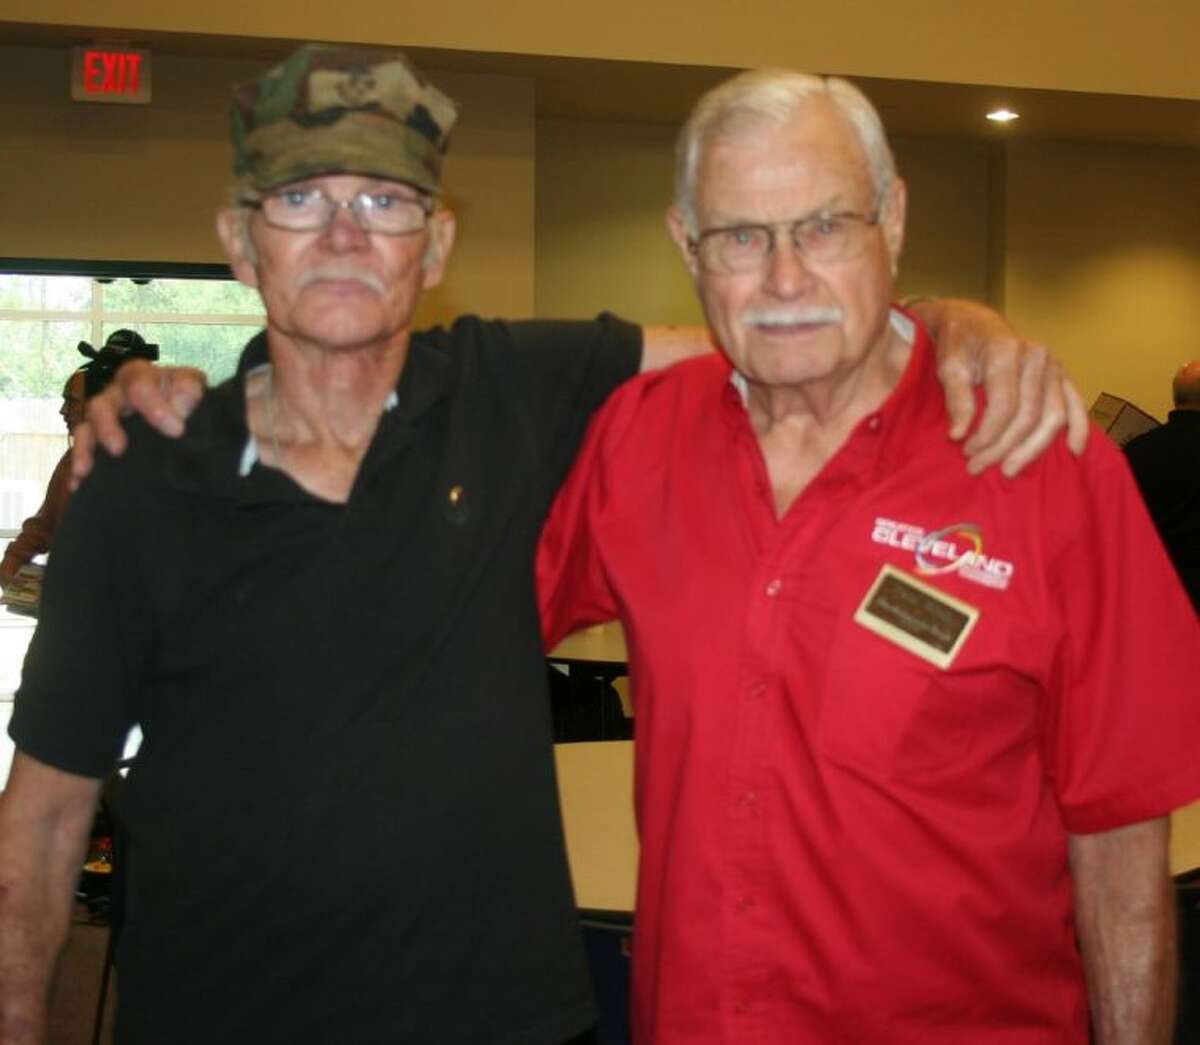 Ken Mercer (left) is taking over the postion of Adjutant for American Legion Post 393 in Cleveland. Along with VFW Post 1839 members, including Paul Rich, local veterans will be working together to help others.